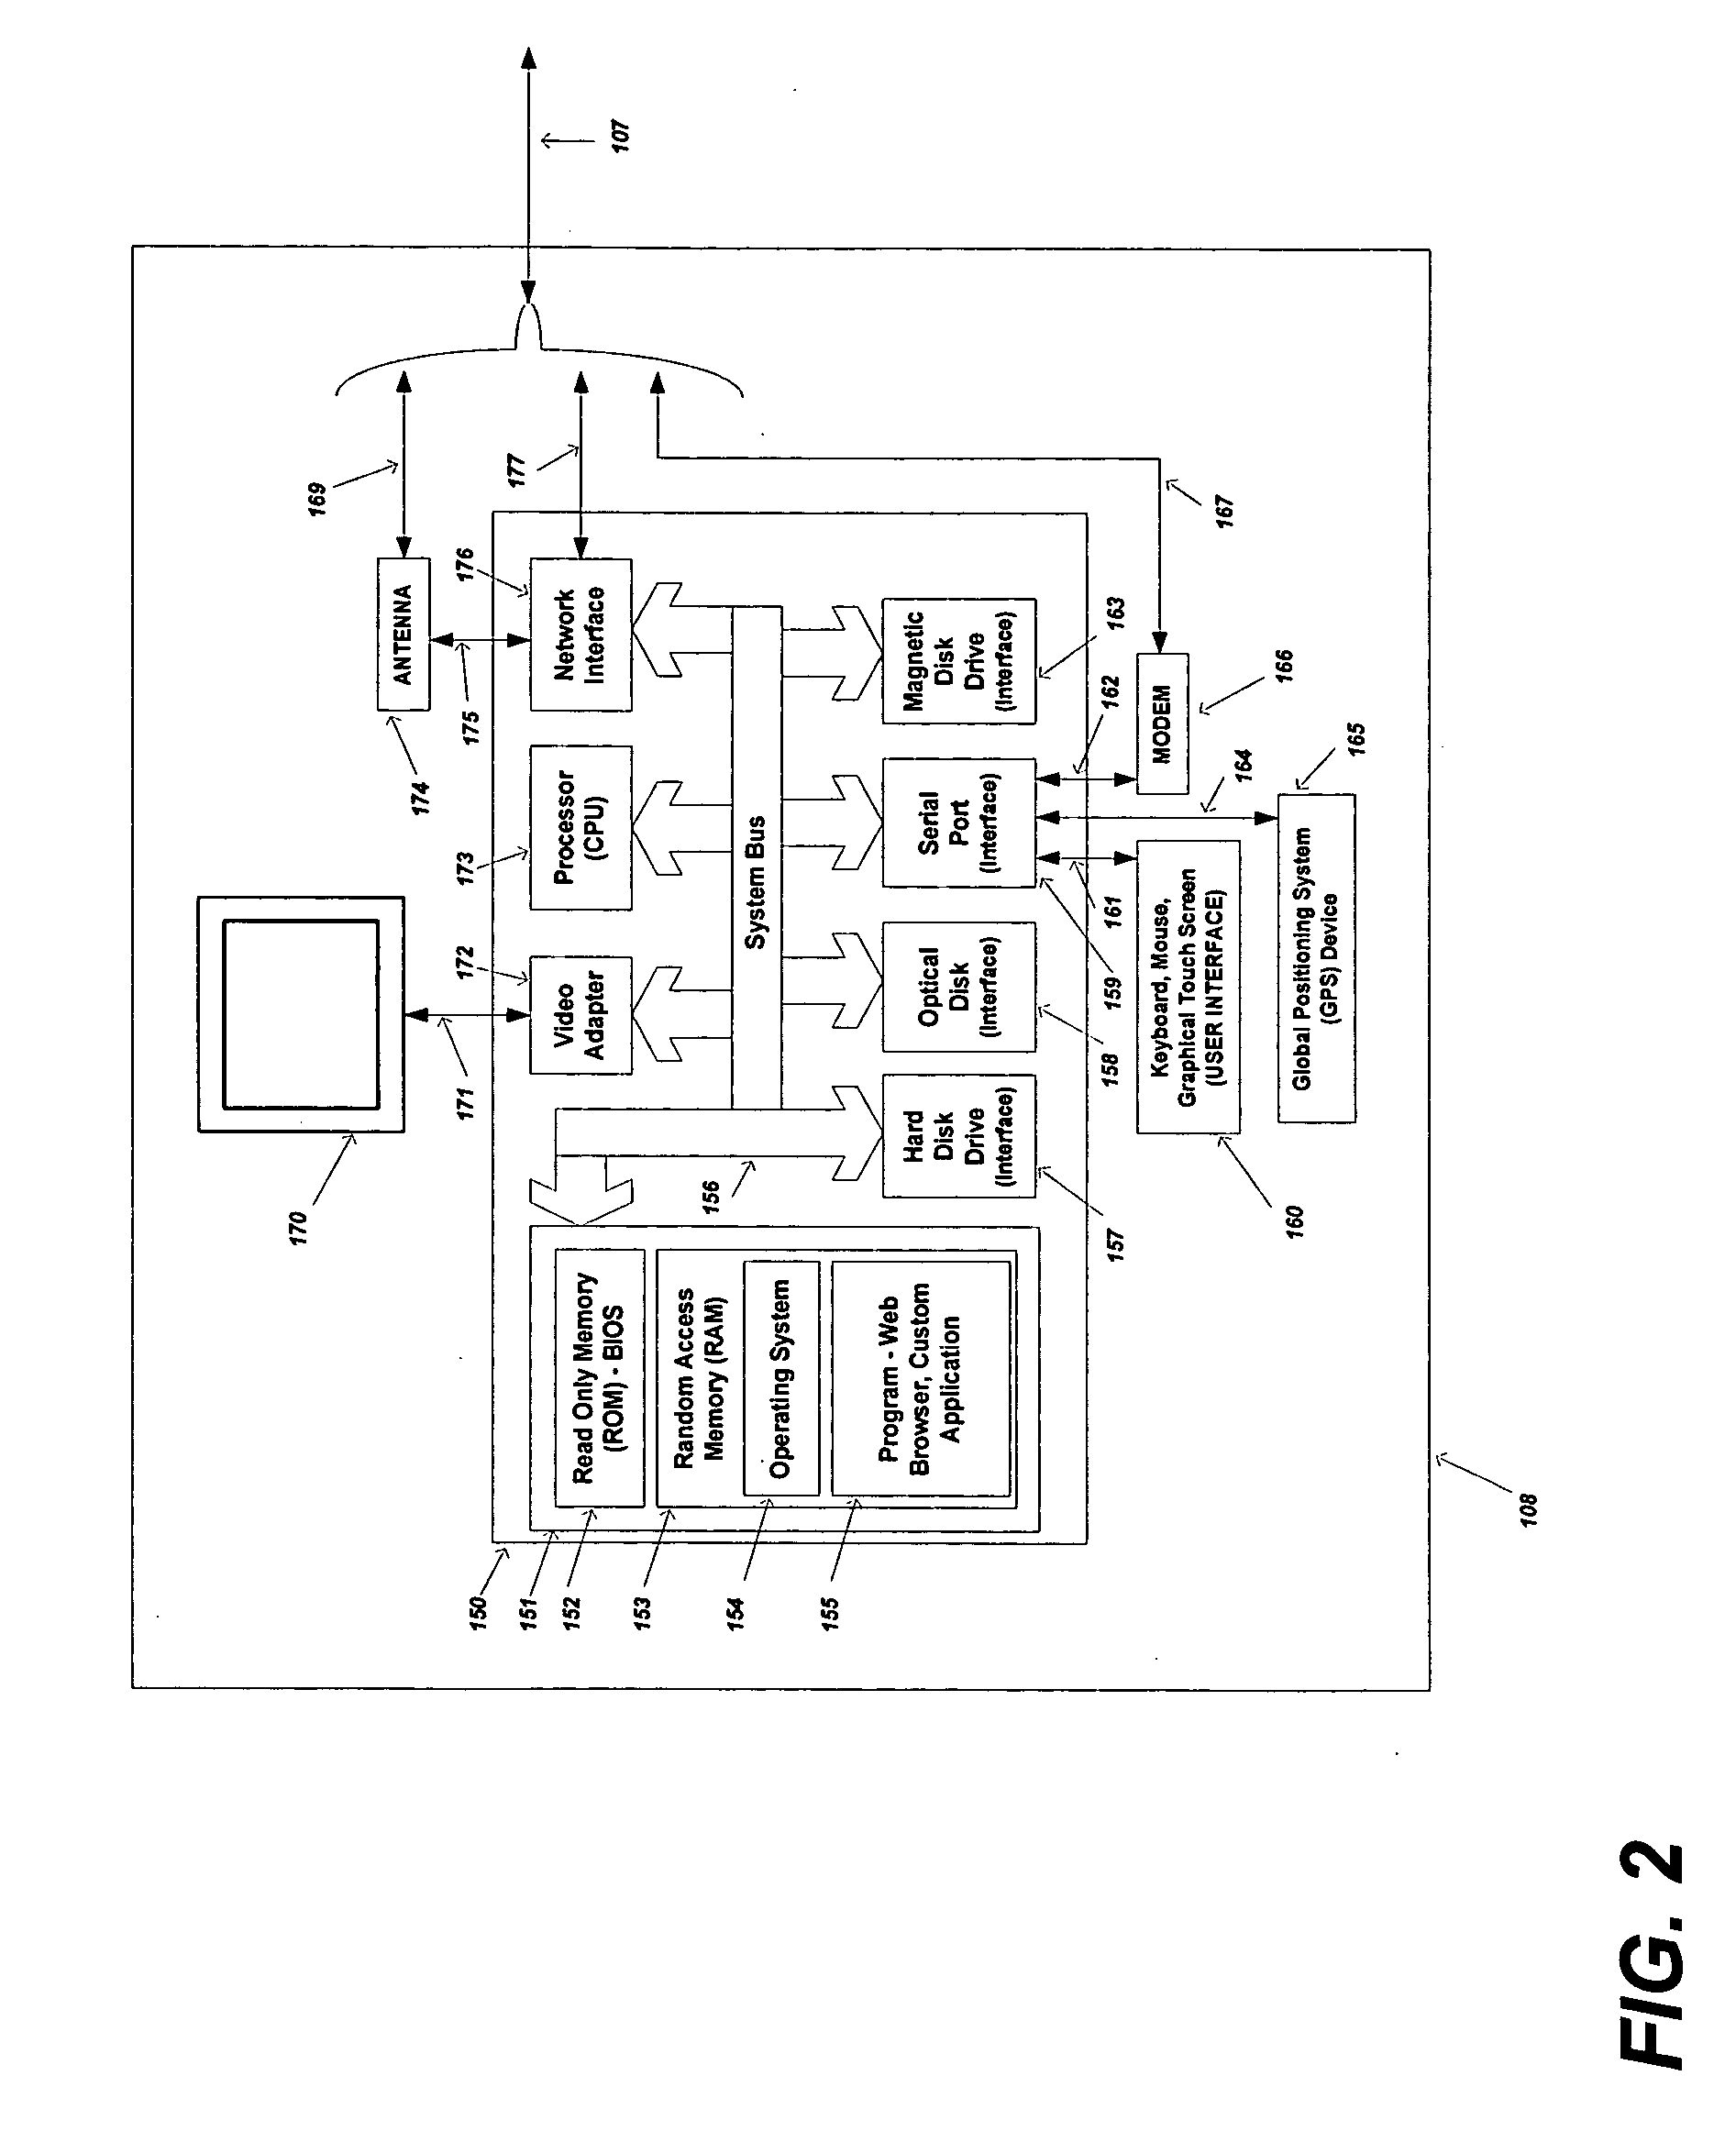 Method and system for identifying and defining geofences